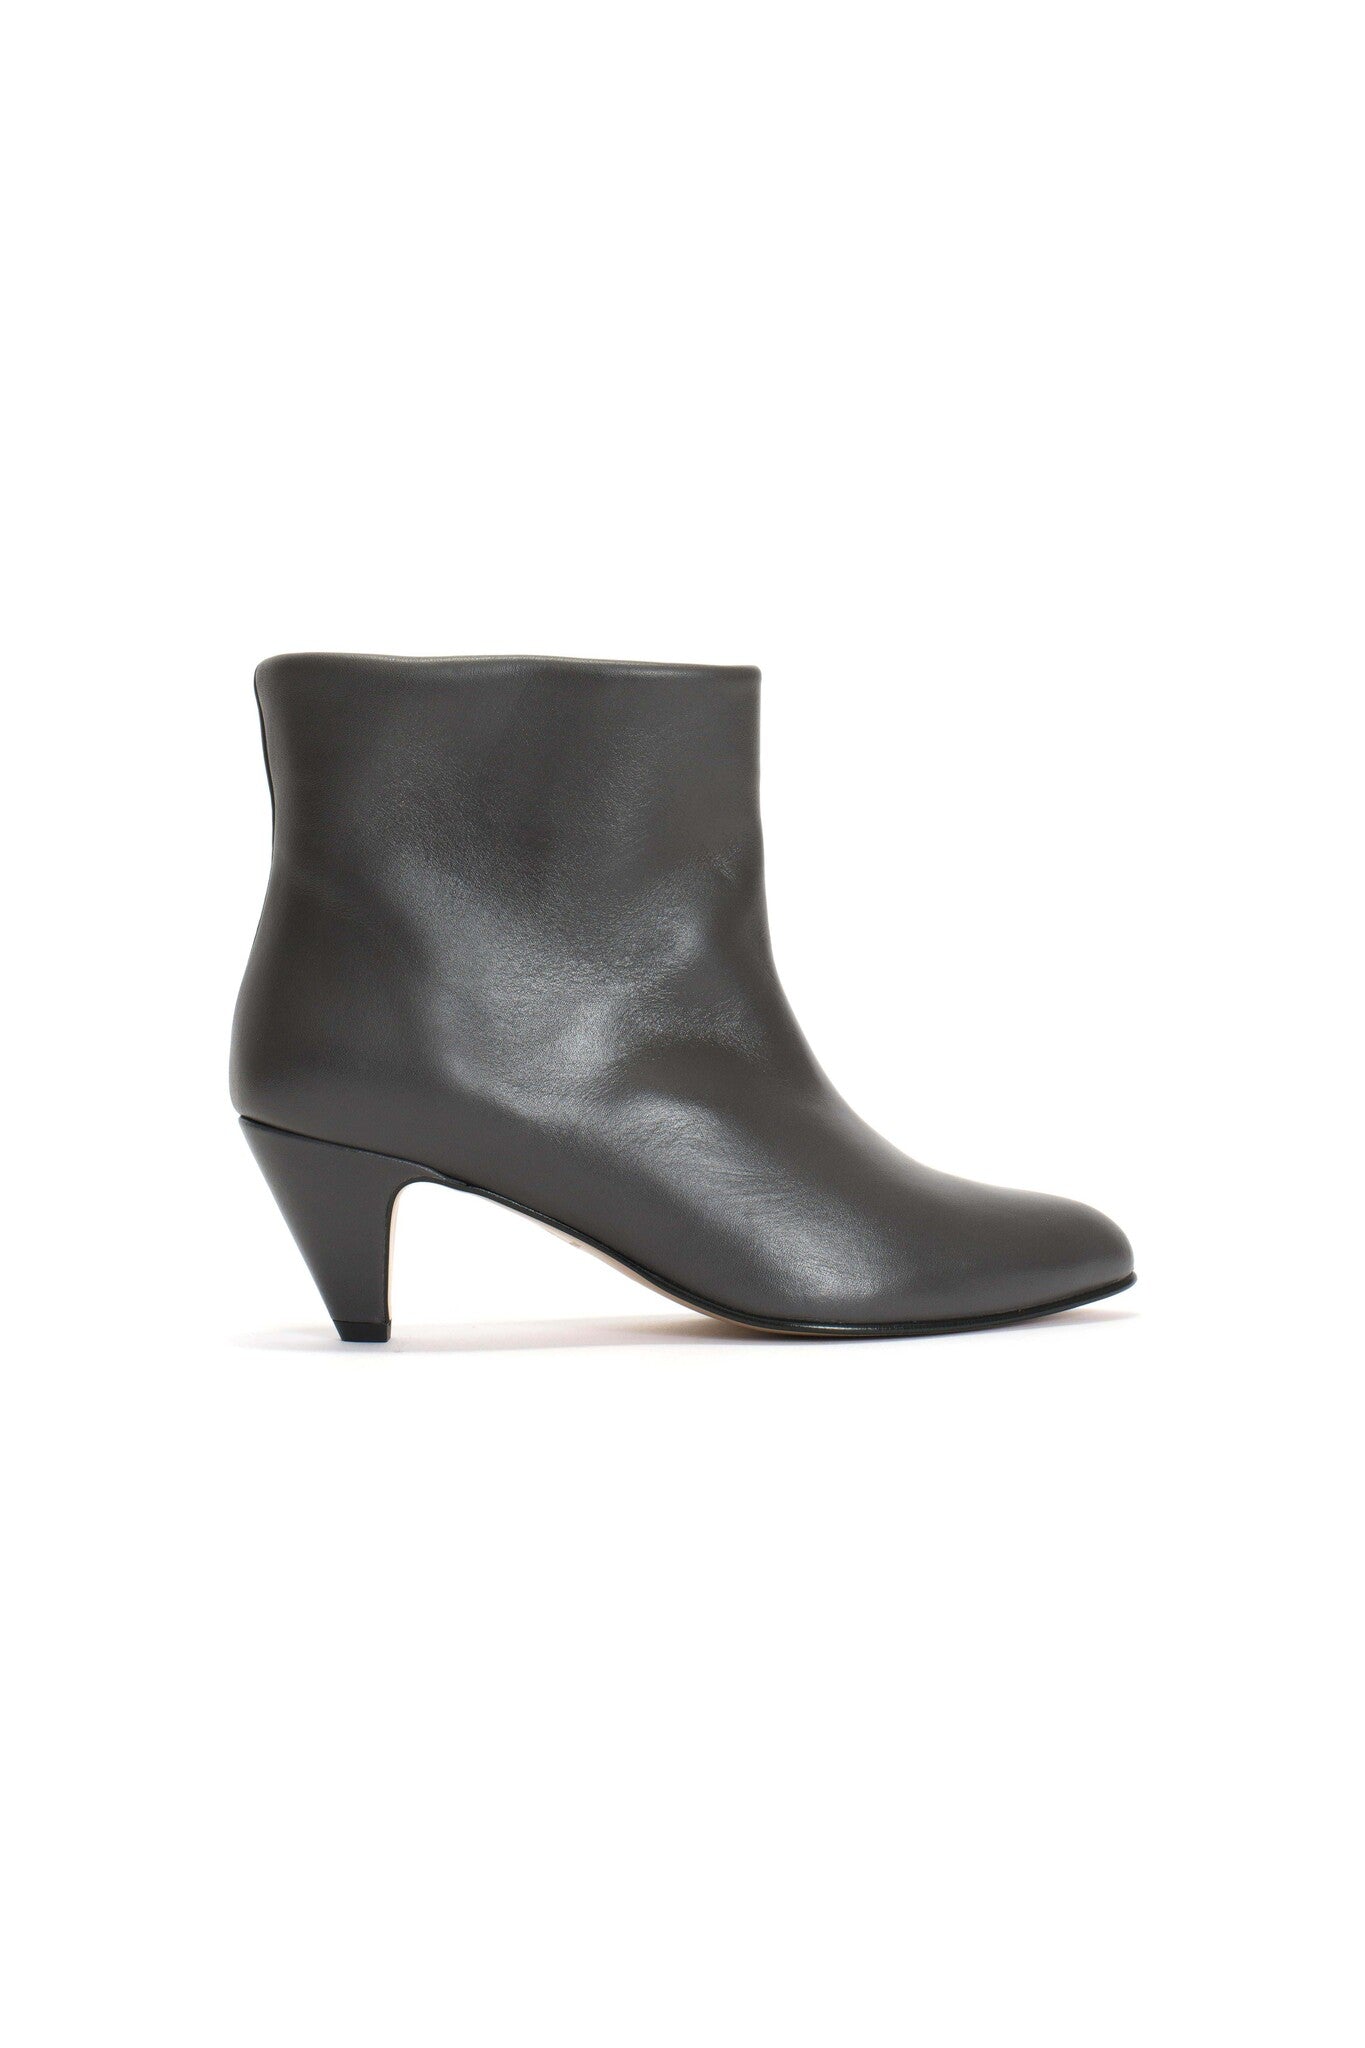 Hilly 50 Stiletto Boots - Dusty Grey